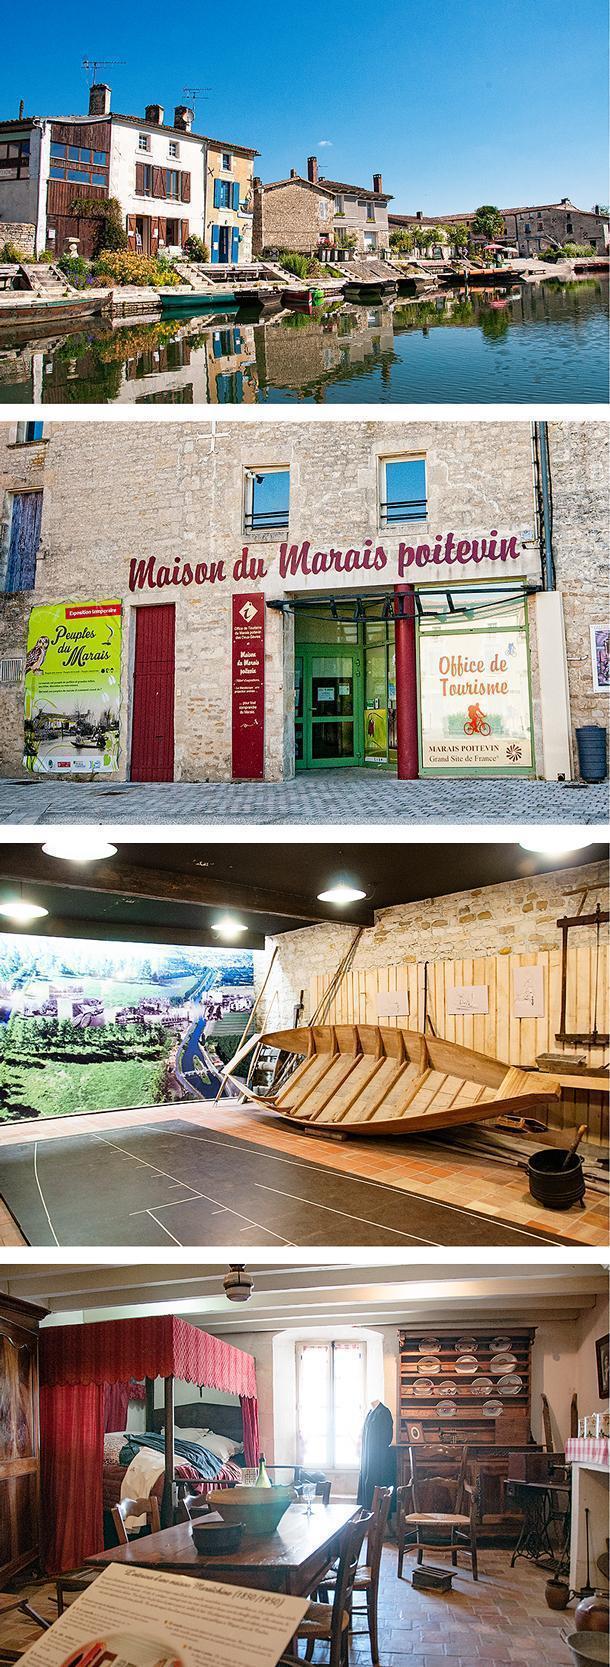 The Maision du Marais gives an overview of life on the marshes.